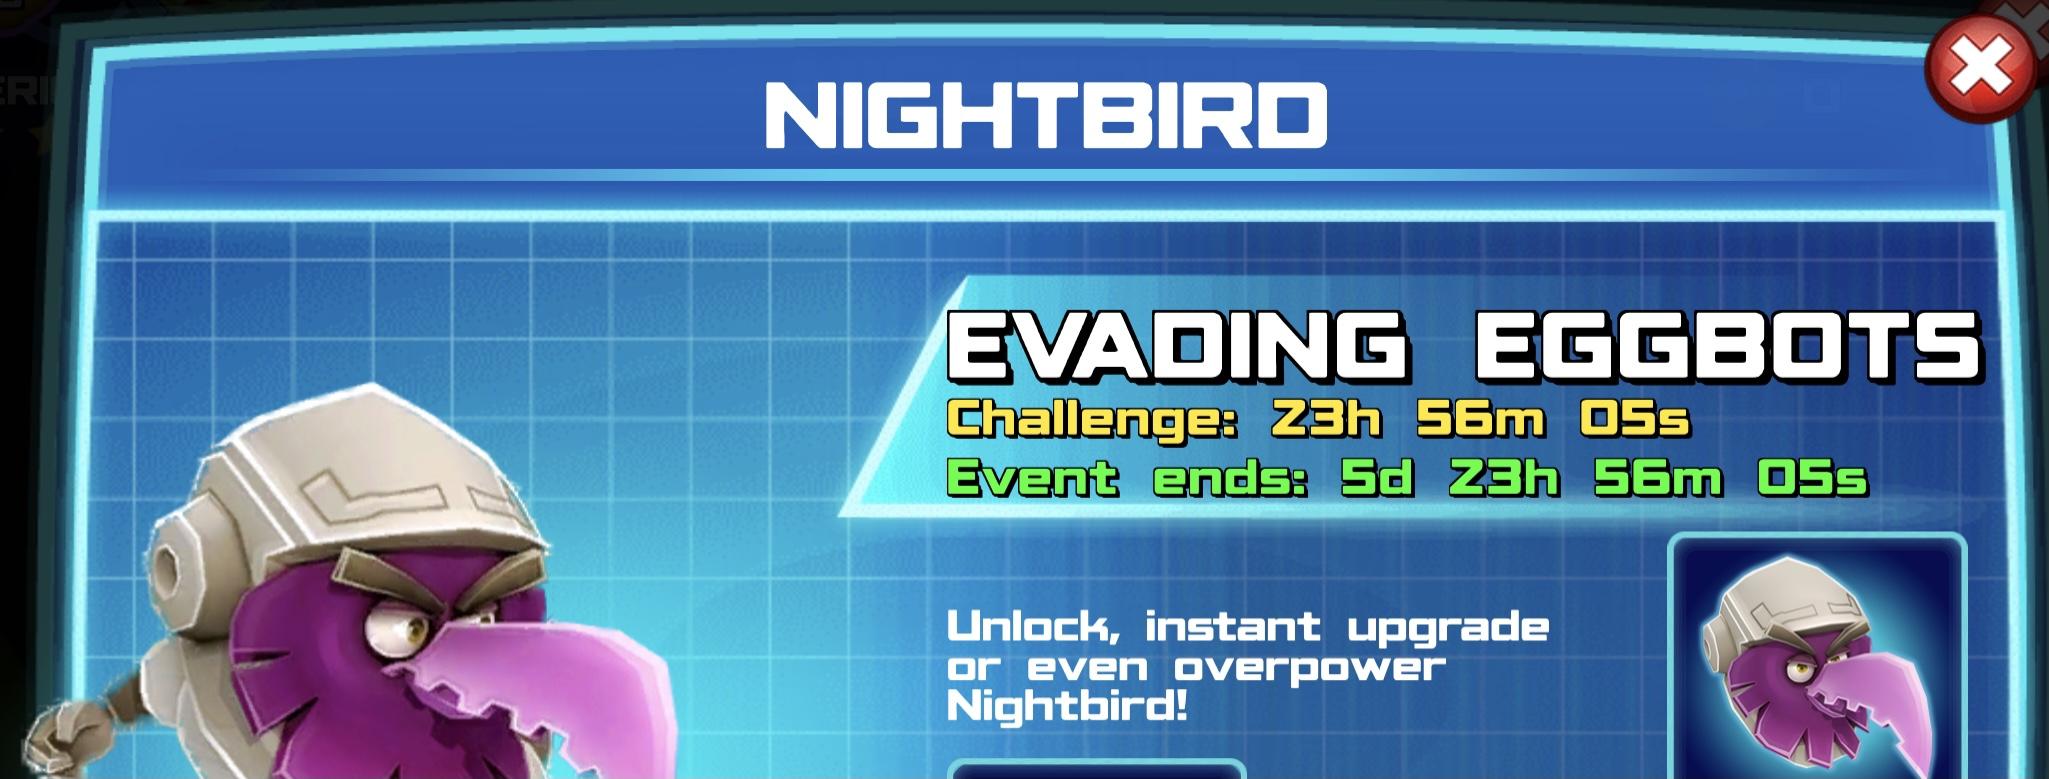 The event banner for Nightbird